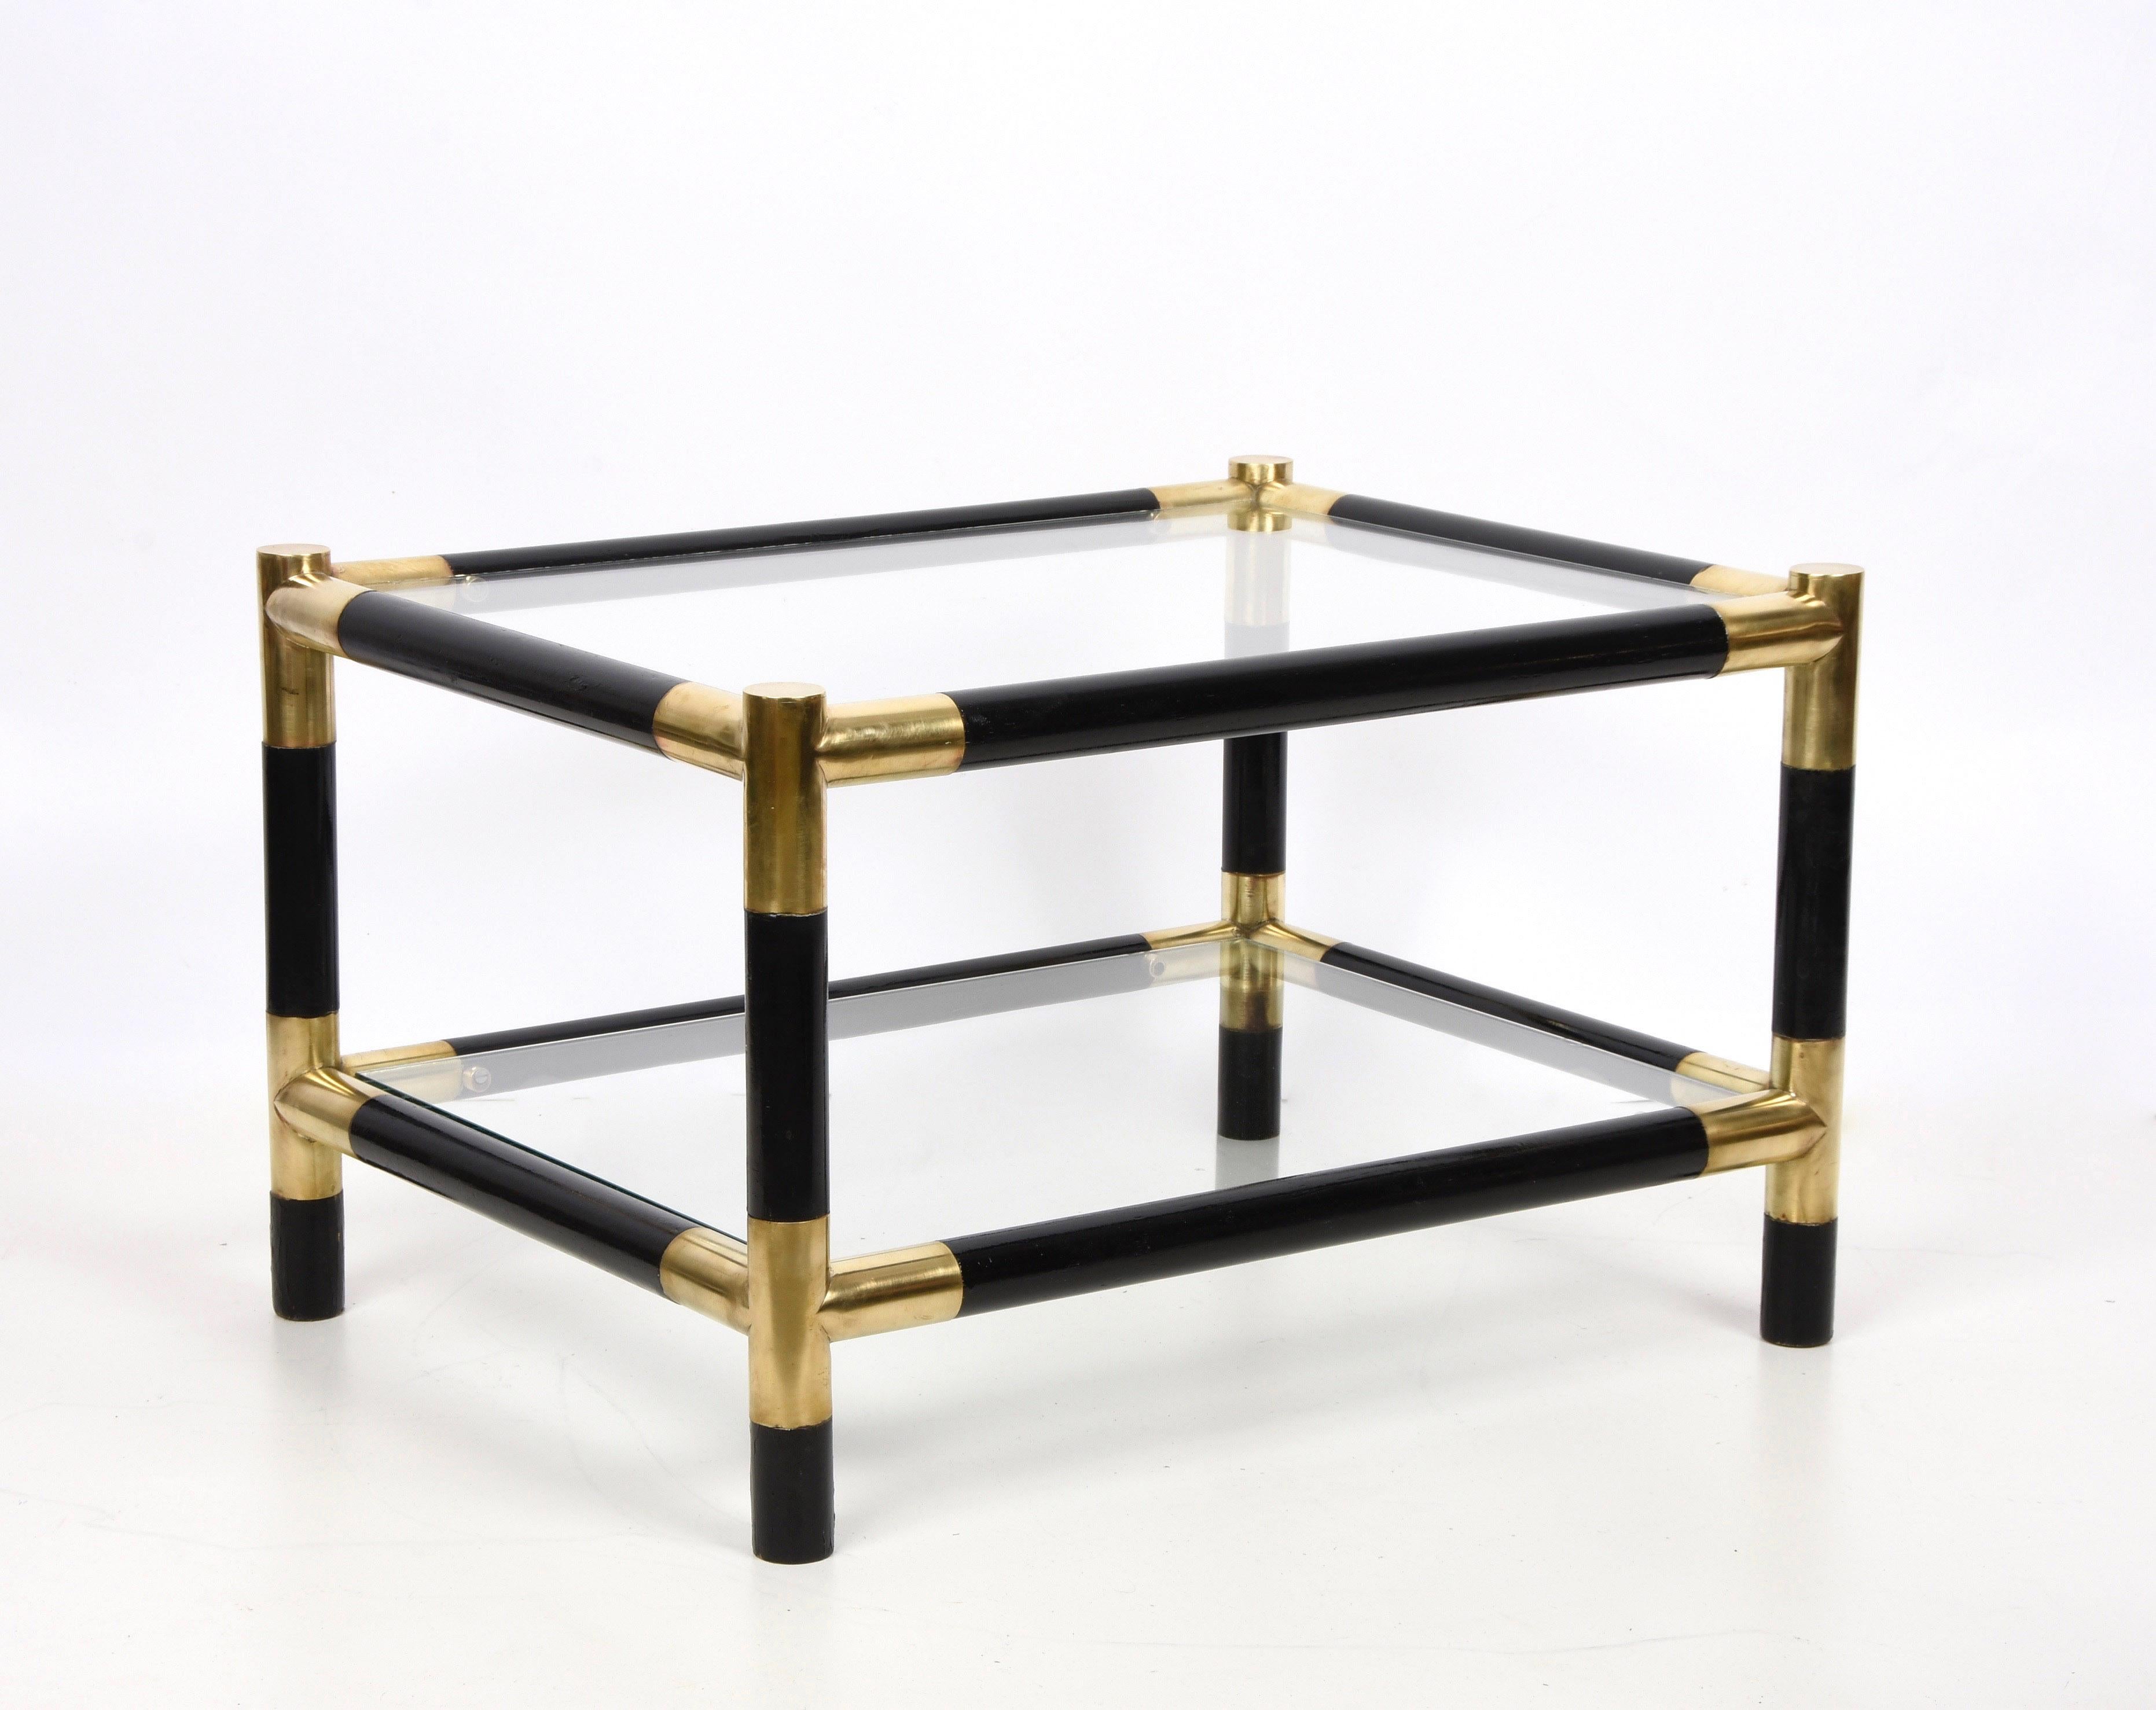 Midcentury Wood and Brass Italian Side Table with Two Crystal Shelves, 1970s For Sale 1